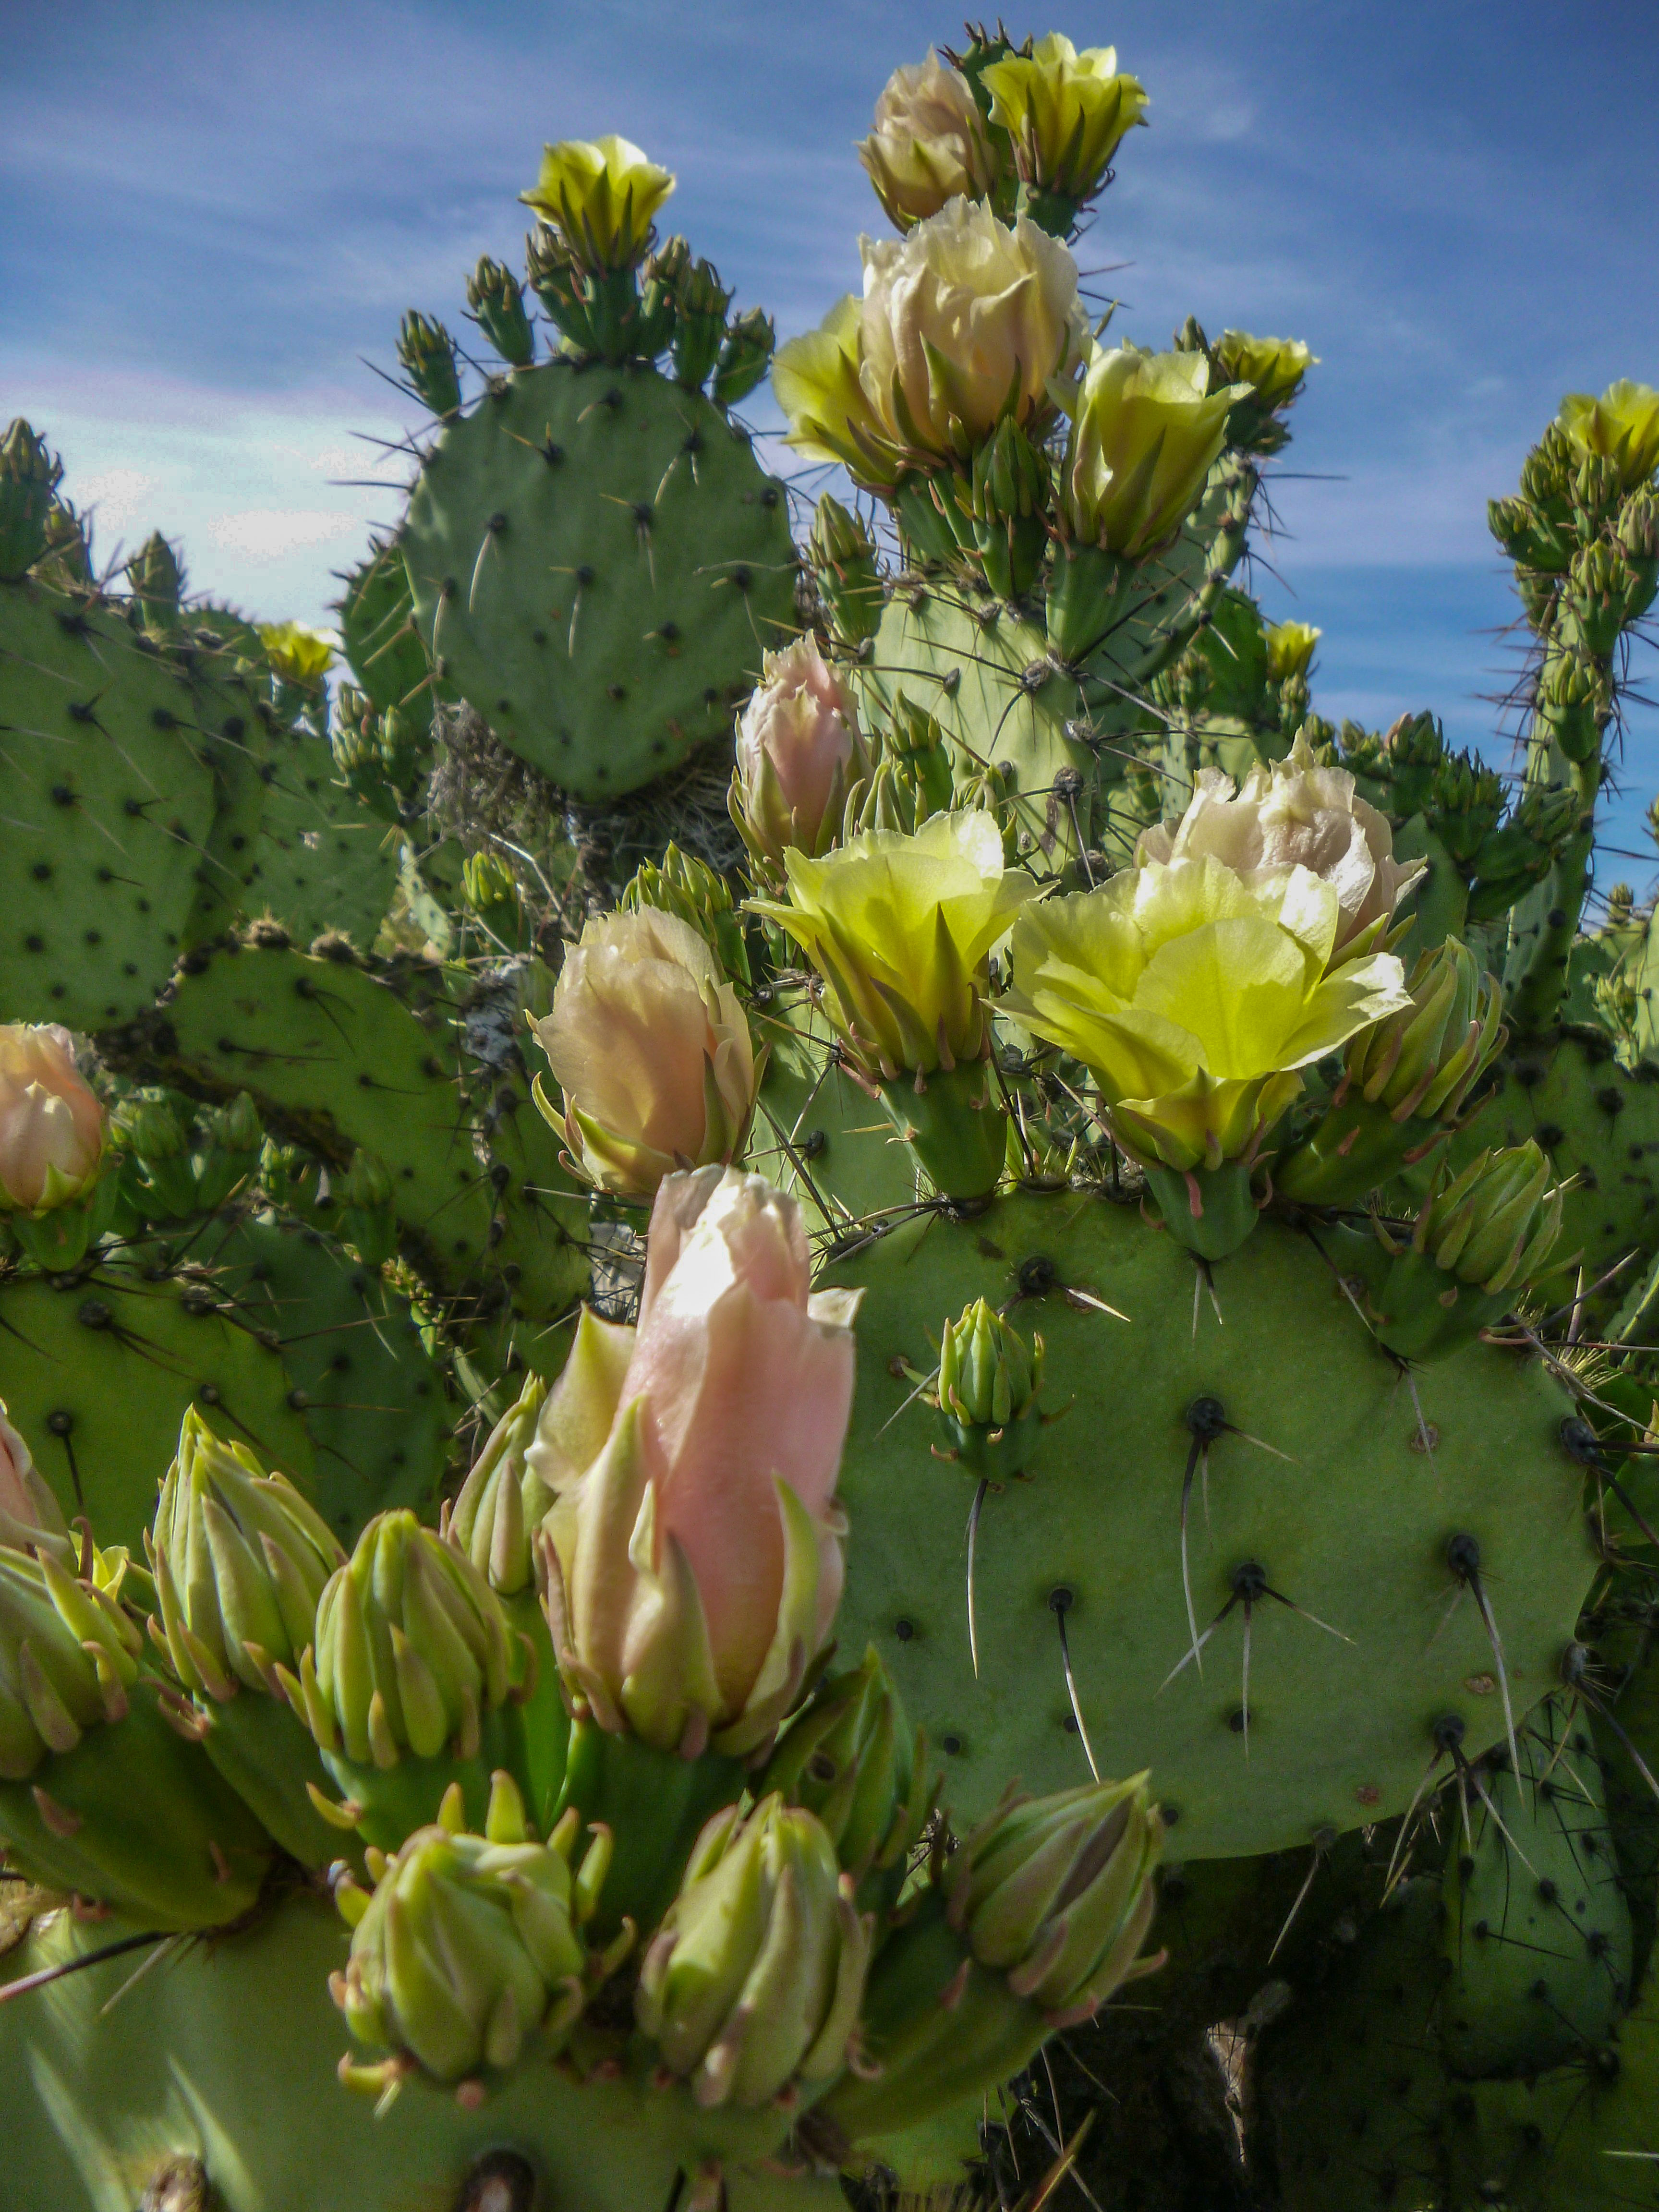 photo of prickly pear cactus in bloom